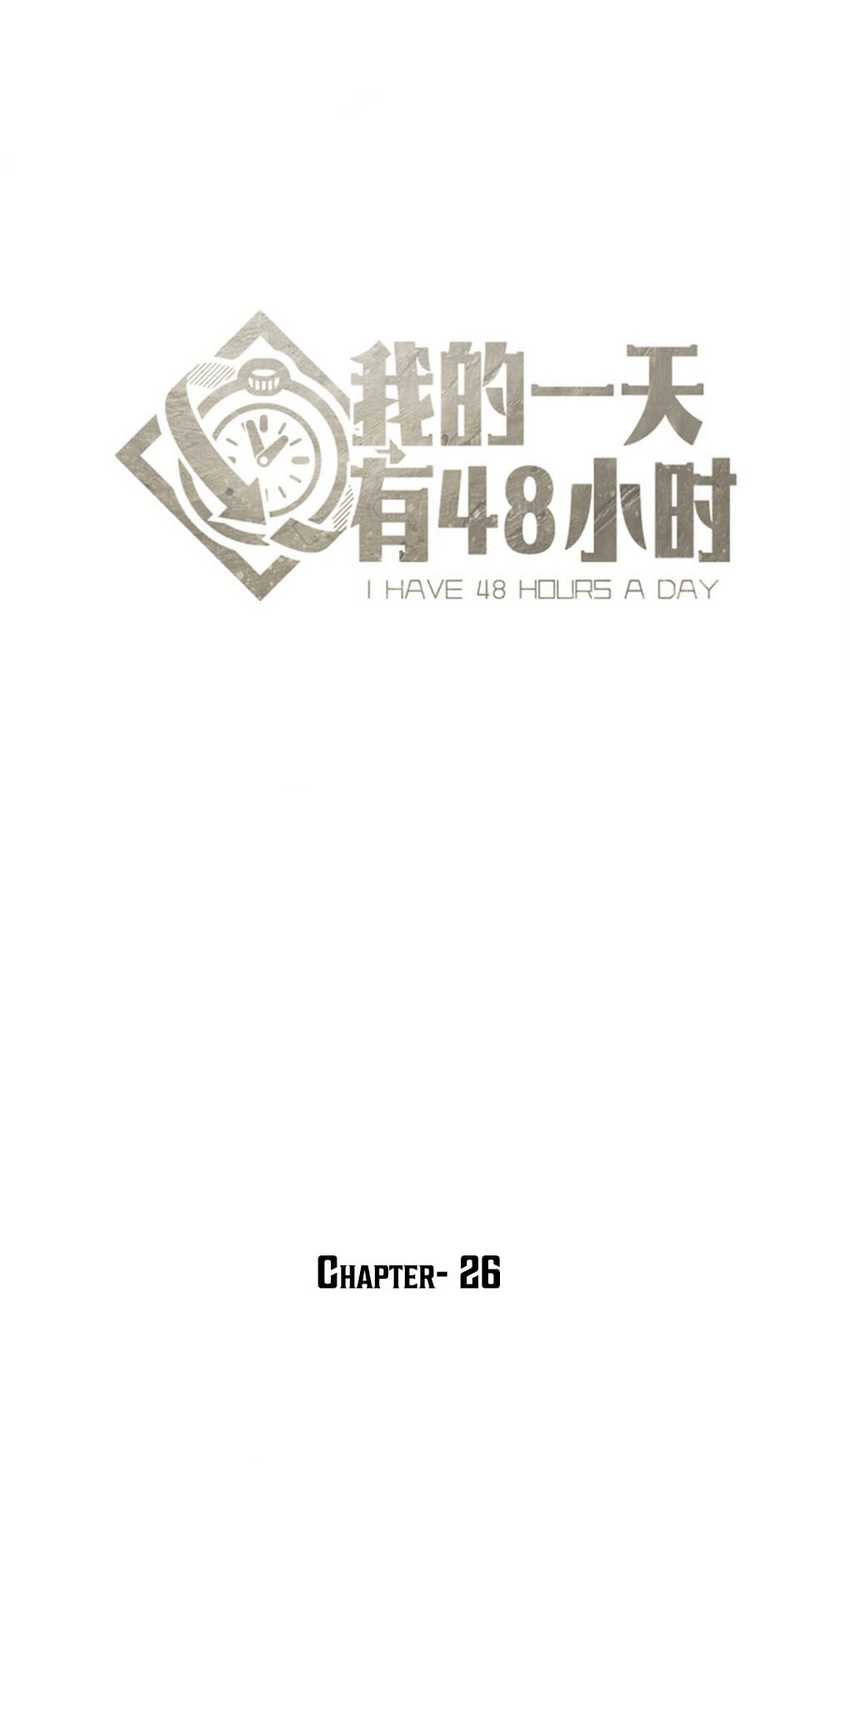 48 Hours a Day Chapter 26